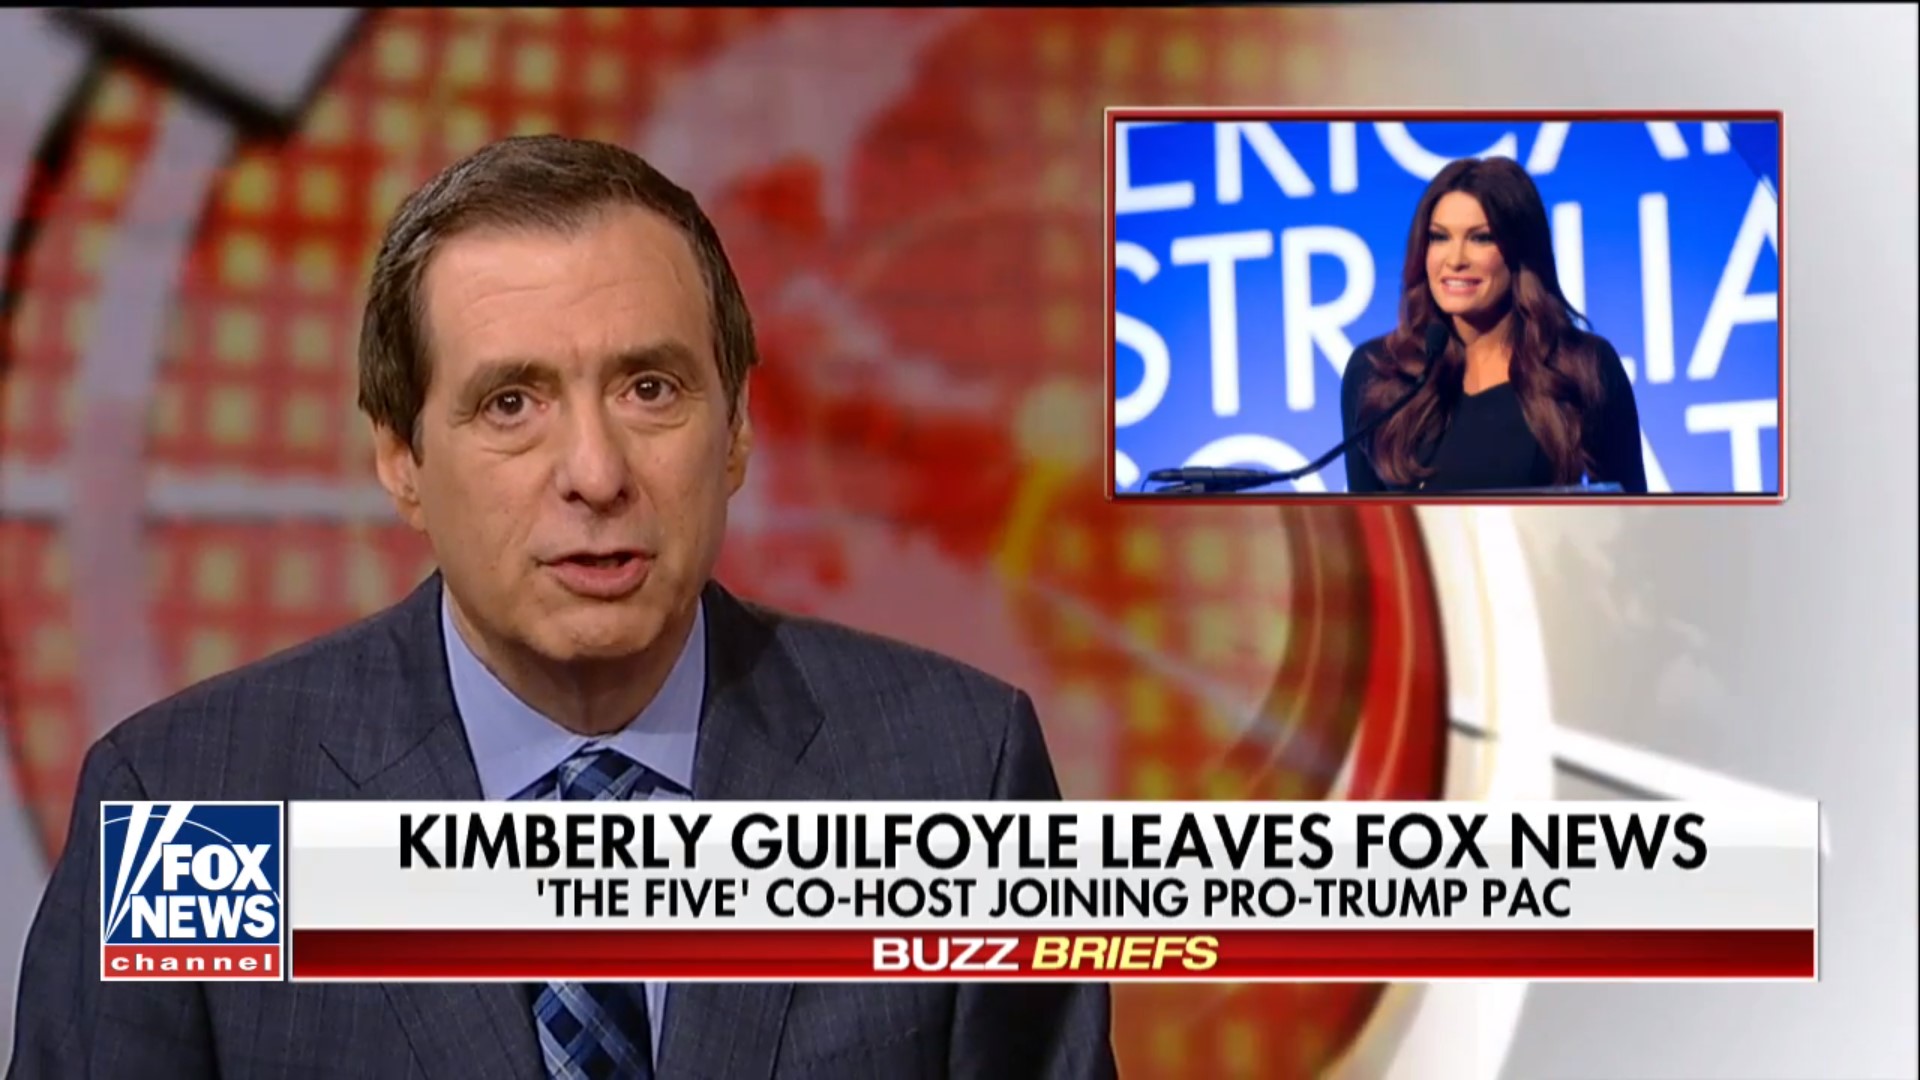 Howard Kurtz Addresses Guilfoyle’s Fox News Departure: There Were ‘Tensions’ Behind The Scenes